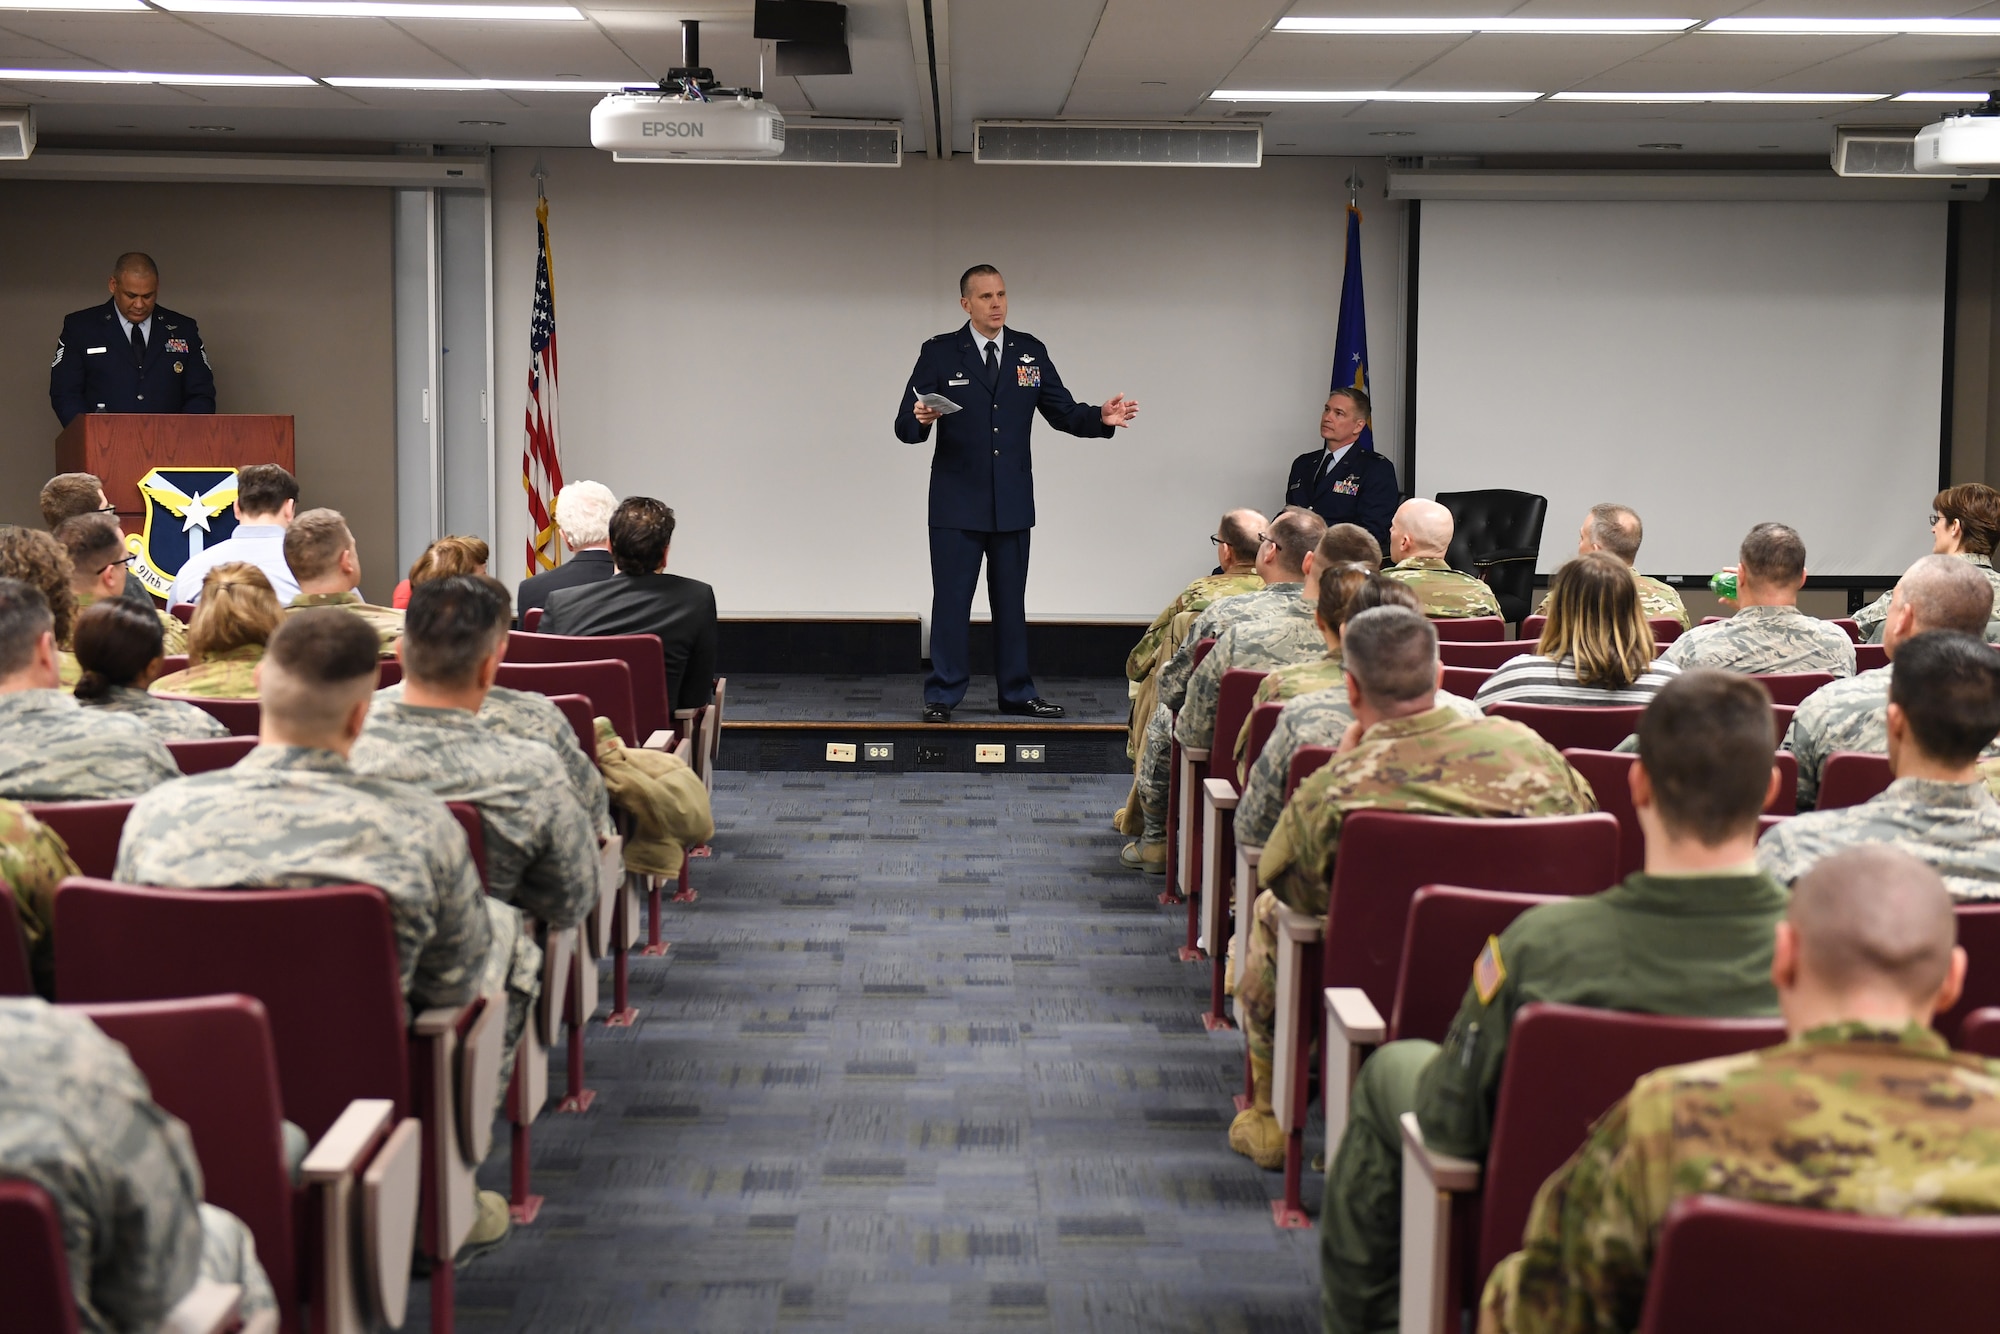 Col. Gregory D. Buchanan, 911th Operations Group commander, addresses Airmen of the 911th OG during an assumption of command ceremony at the Pittsburgh International Airport Air Reserve Station, Pennsylvania, Jan. 6, 2019. Buchanan assumed command in front of friends, family, and Airmen with whom he has served alongside for years. (U.S. Air Force photo by Tech. Sgt. Marjorie A. Schurr)